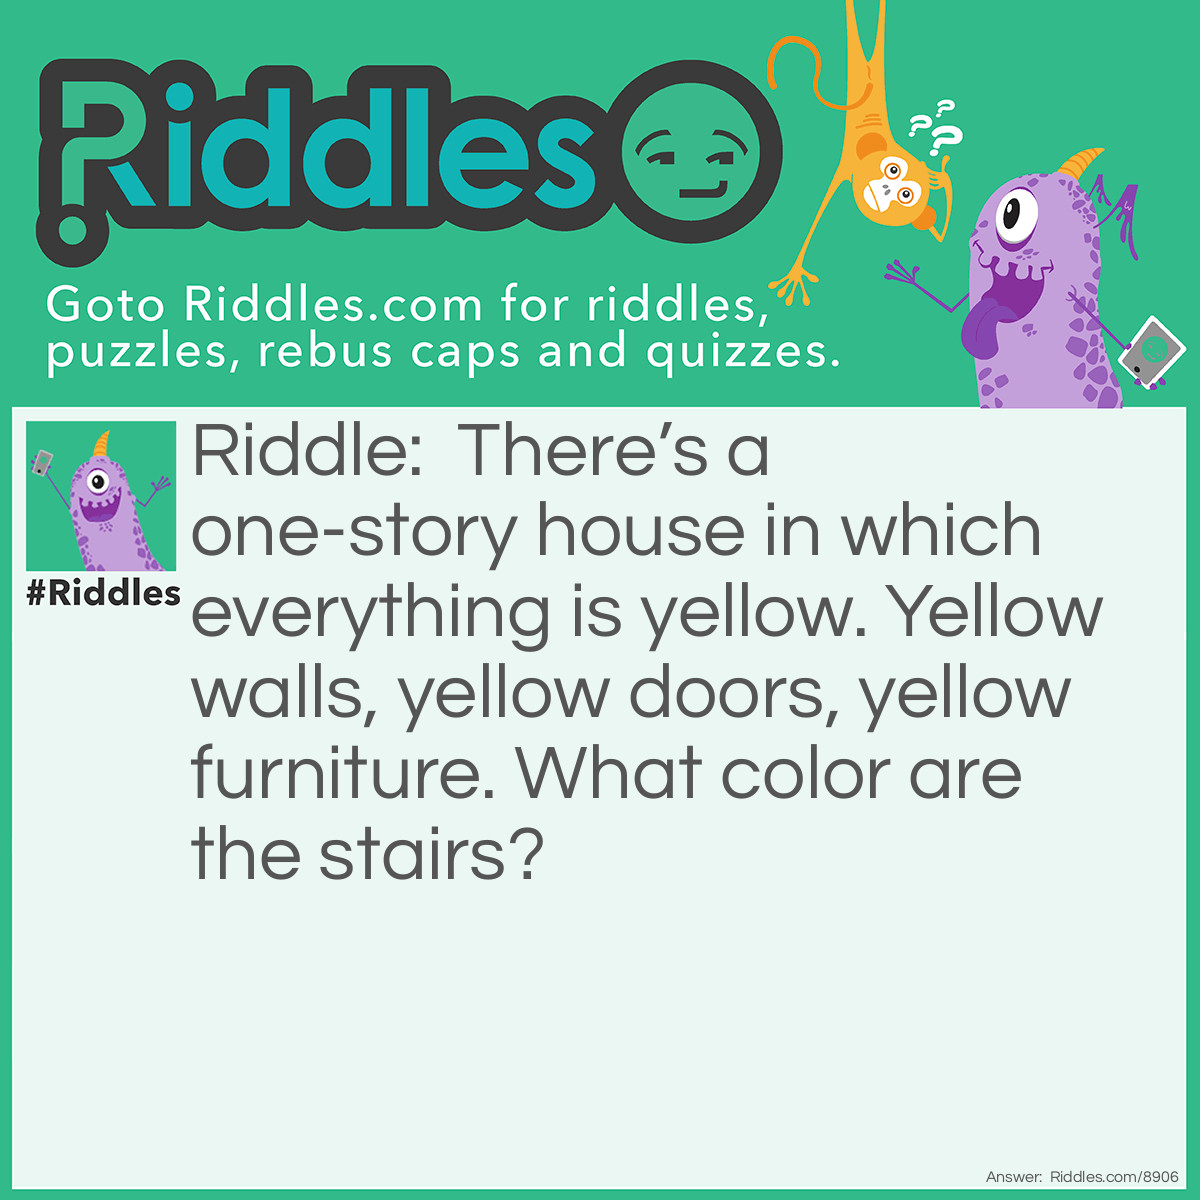 Riddle: There's a one-story house in which everything is yellow. Yellow walls, yellow doors, yellow furniture. What color are the stairs? Answer: There aren’t any—it’s a one-story house.